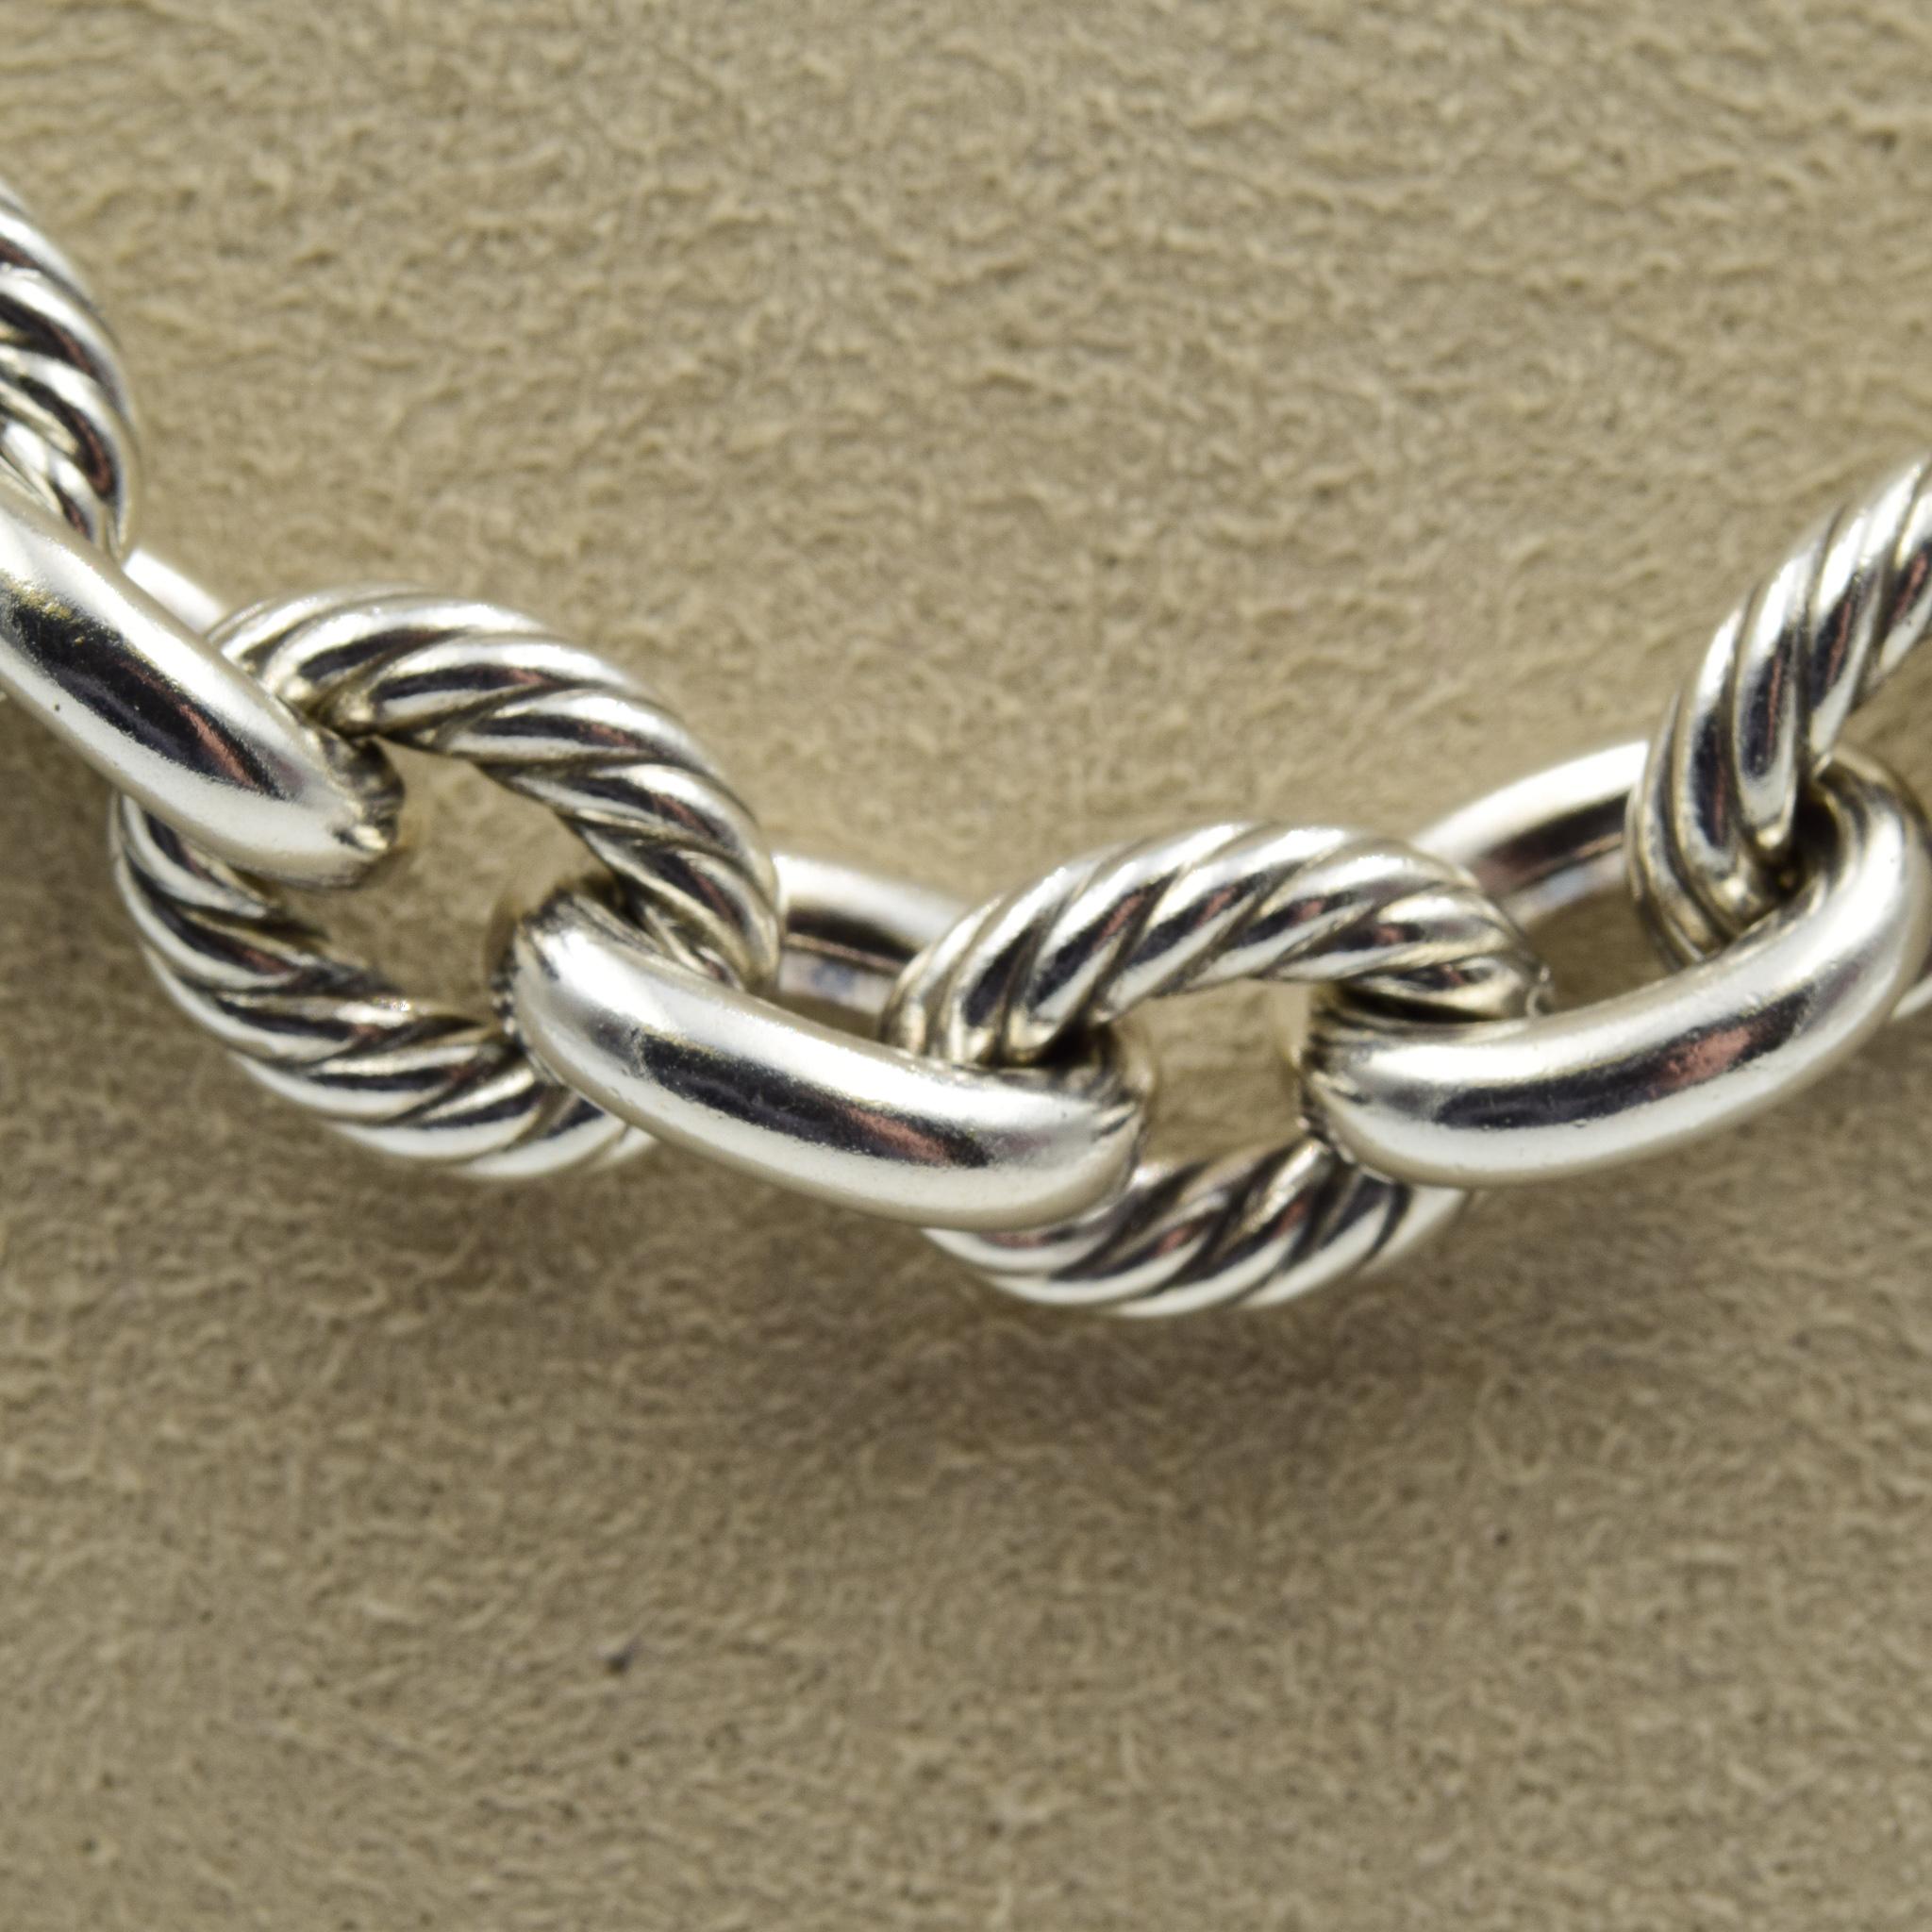 This David Yurman has the cable wrap chain design in a 17.5